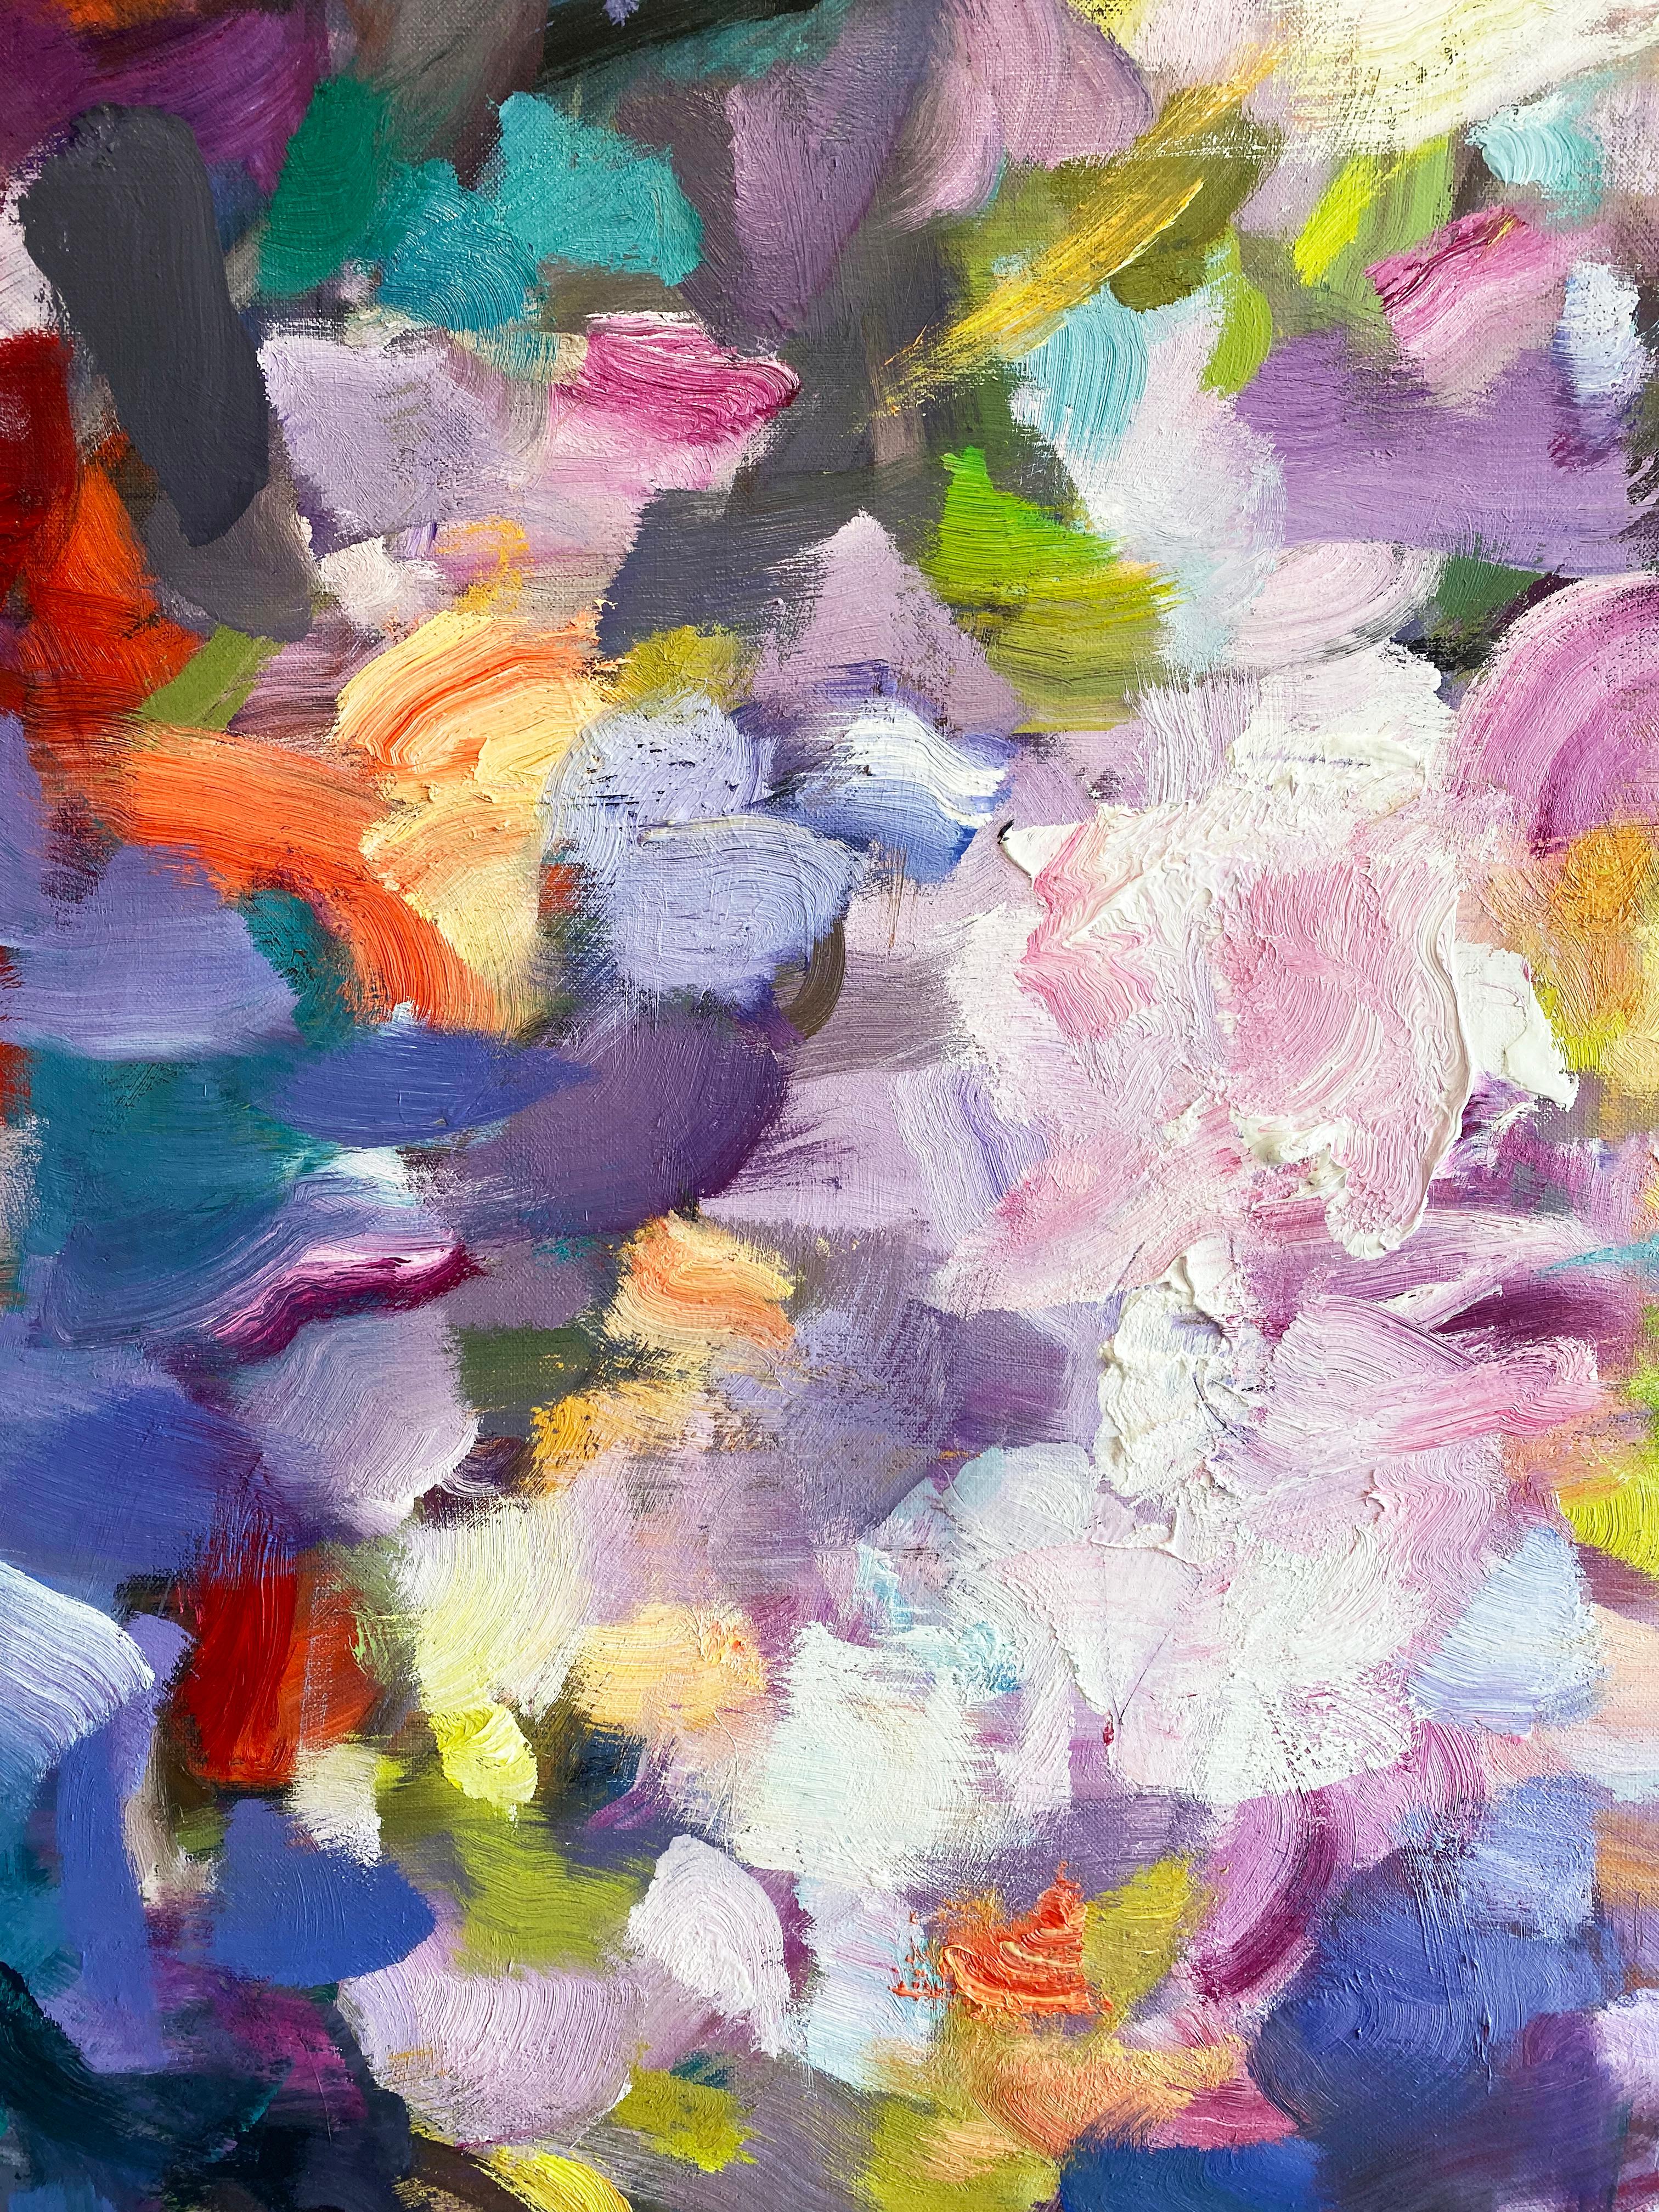 Abstract Expressionist Painting by Yangyang Pan 'Luscious' 2